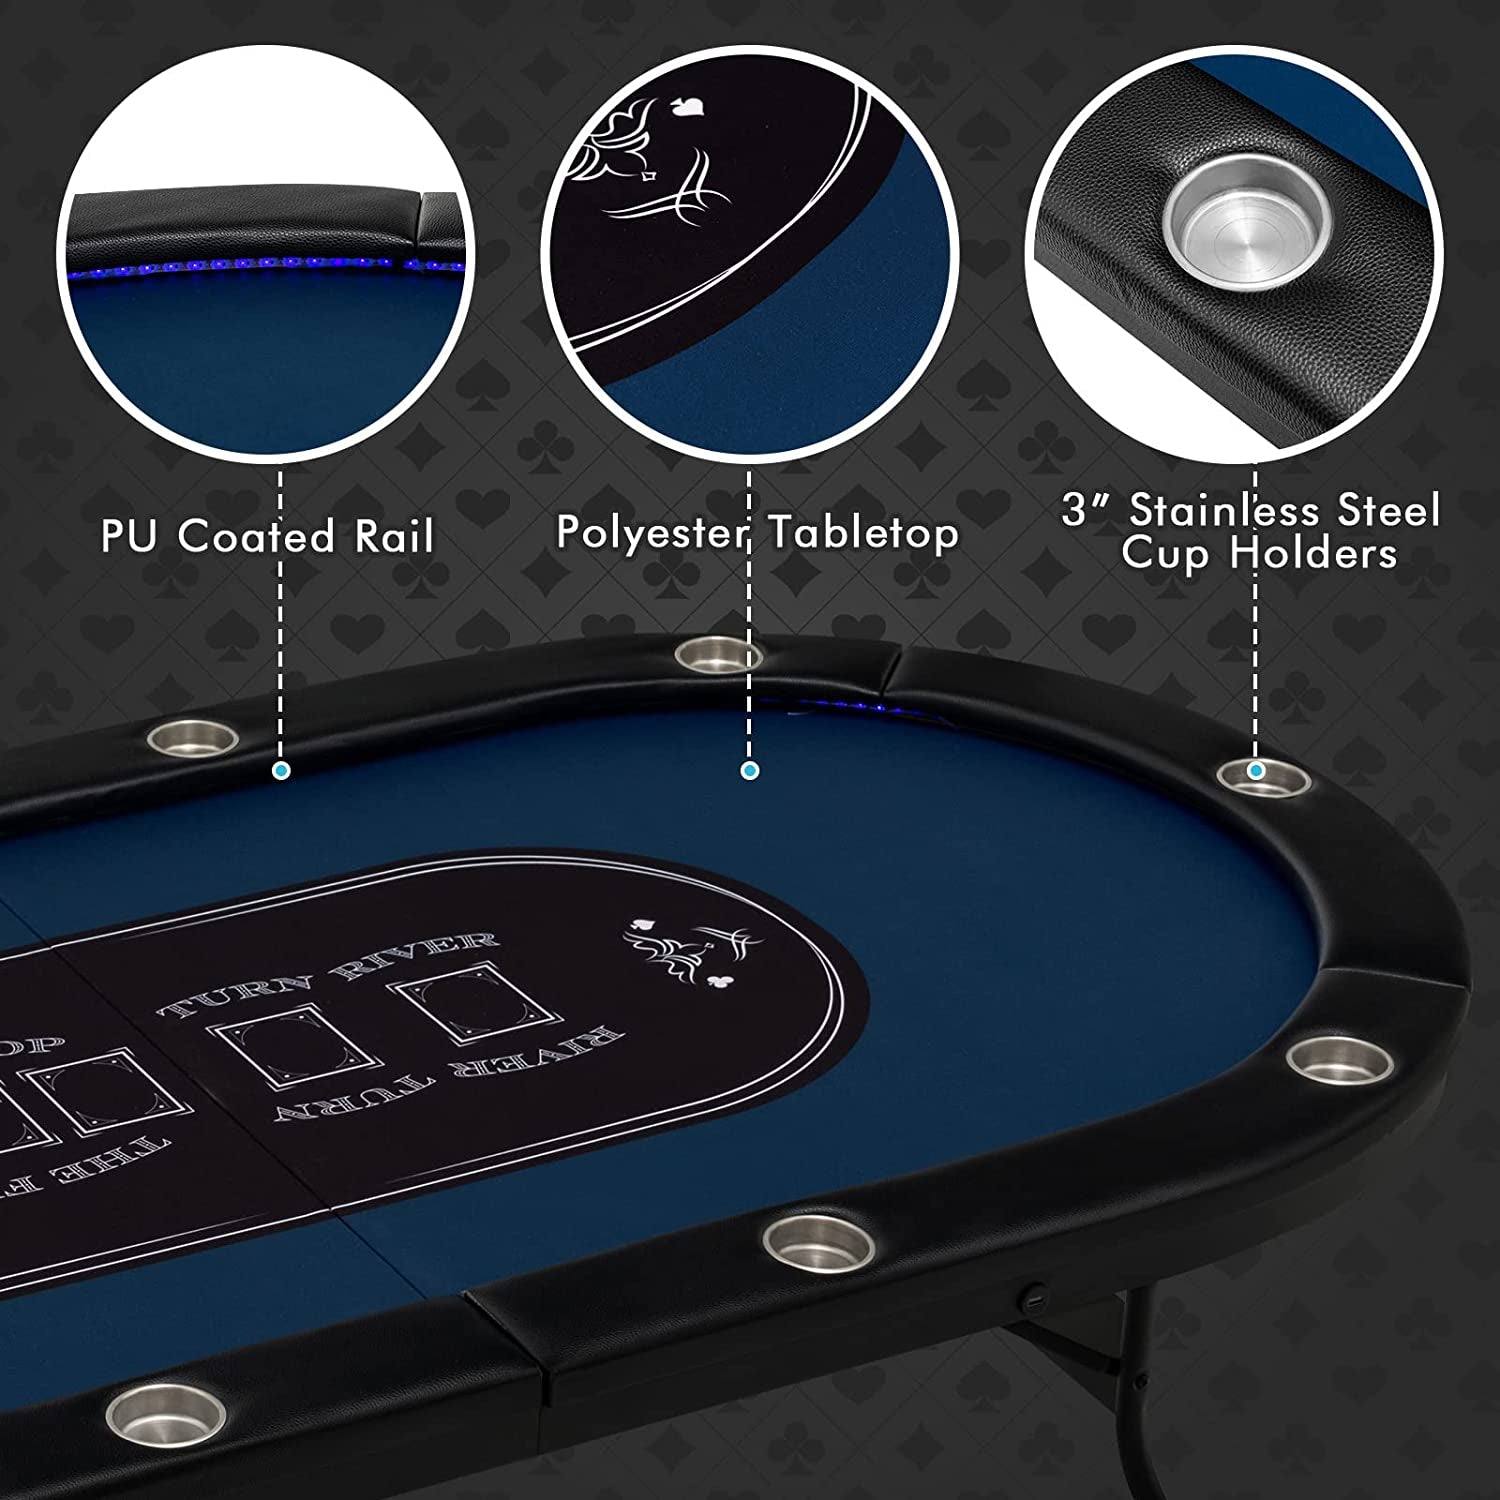 10 Players Poker Table with Cup Holder, Folding Casino Leisure Table with 4 USB Ports, Extra Lights, Easy to Assemble, Foldable Game Poker Tables for Texas, Card Games, Blue